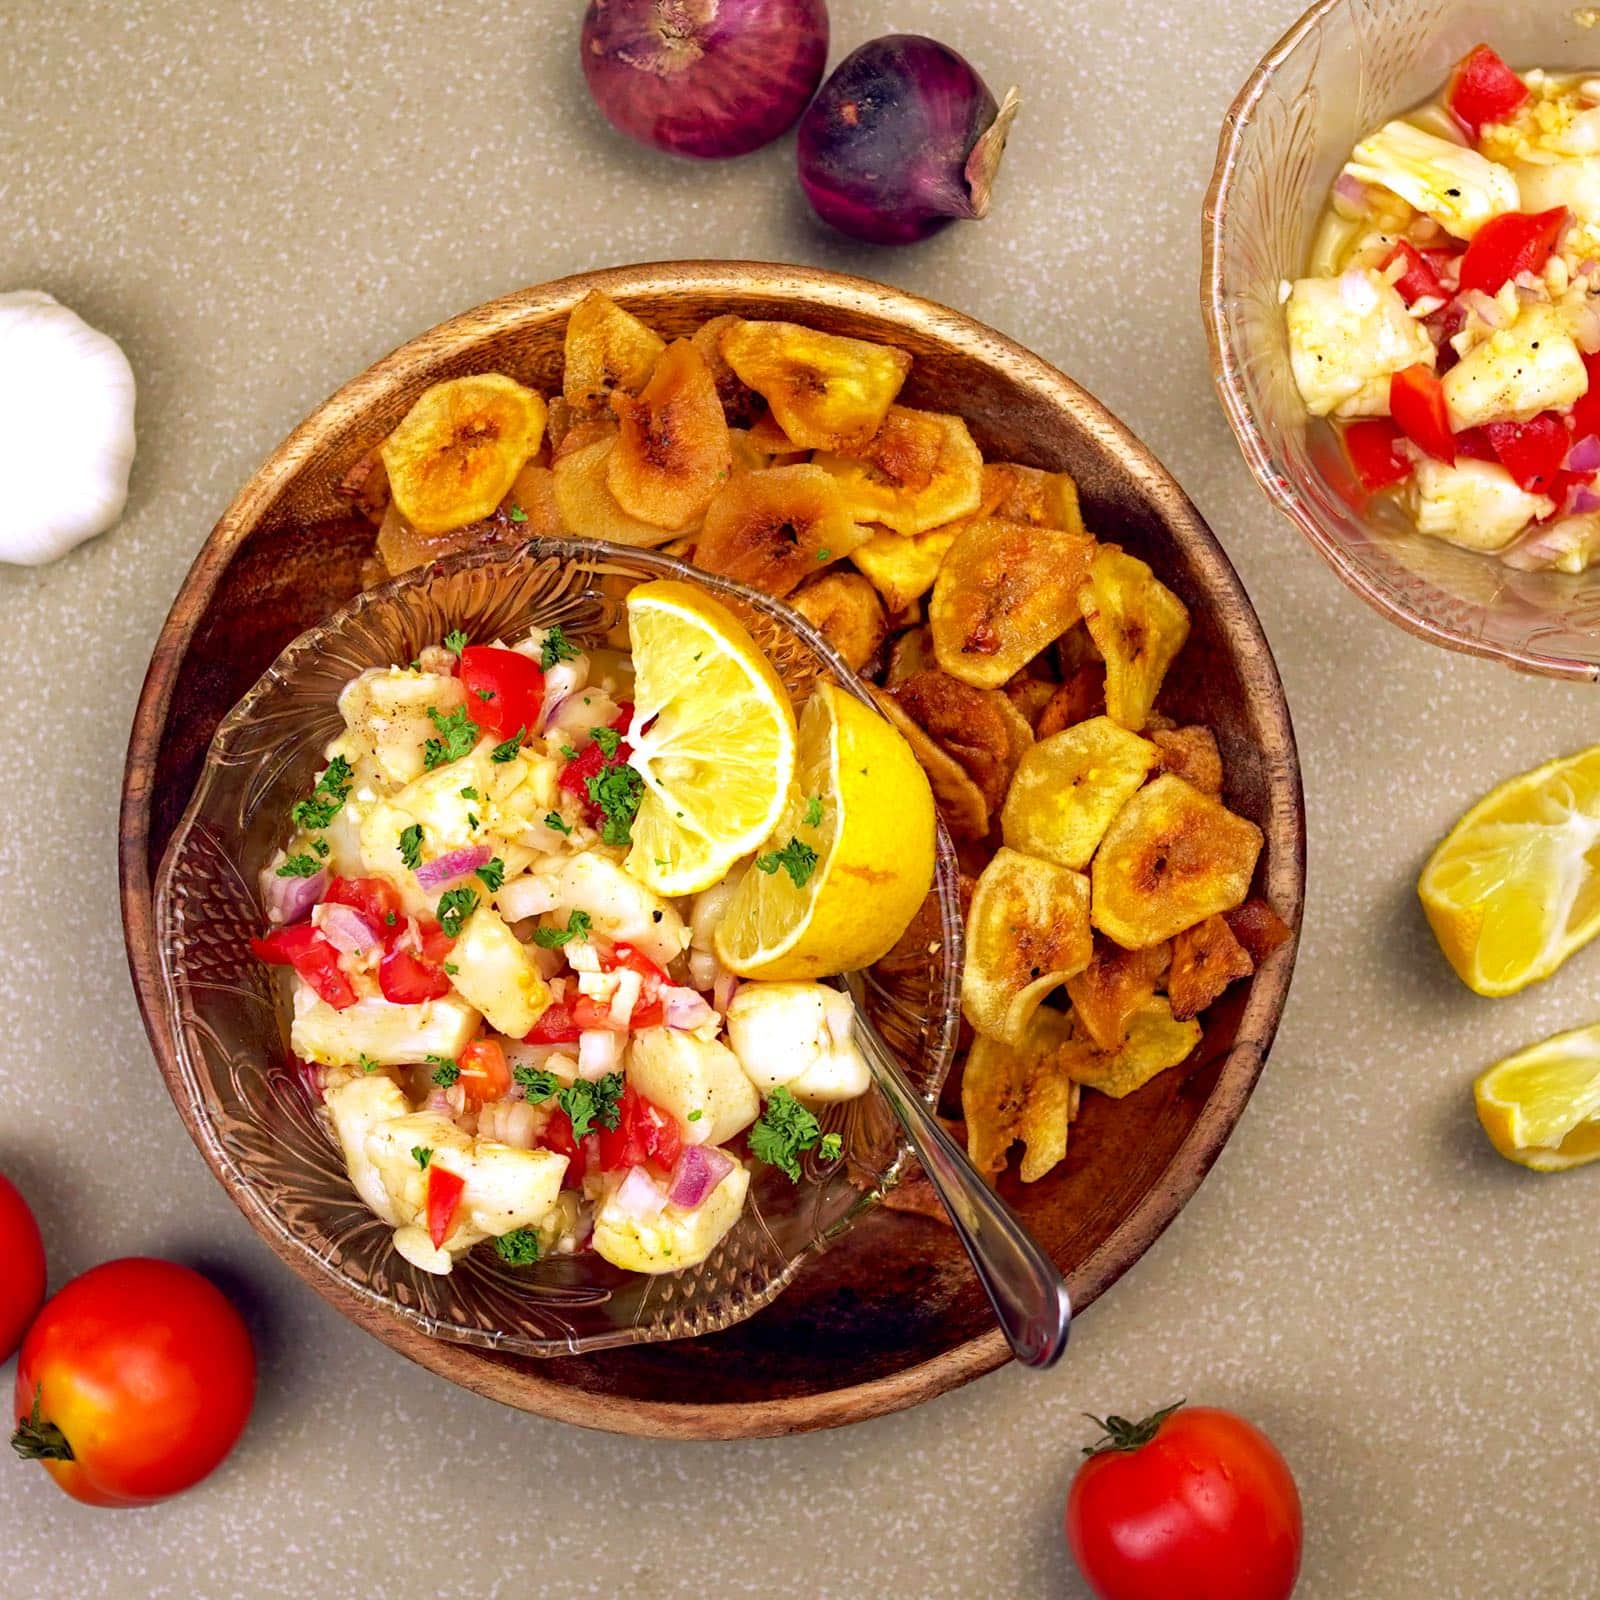 Peruvian scallop ceviche with fried plantains